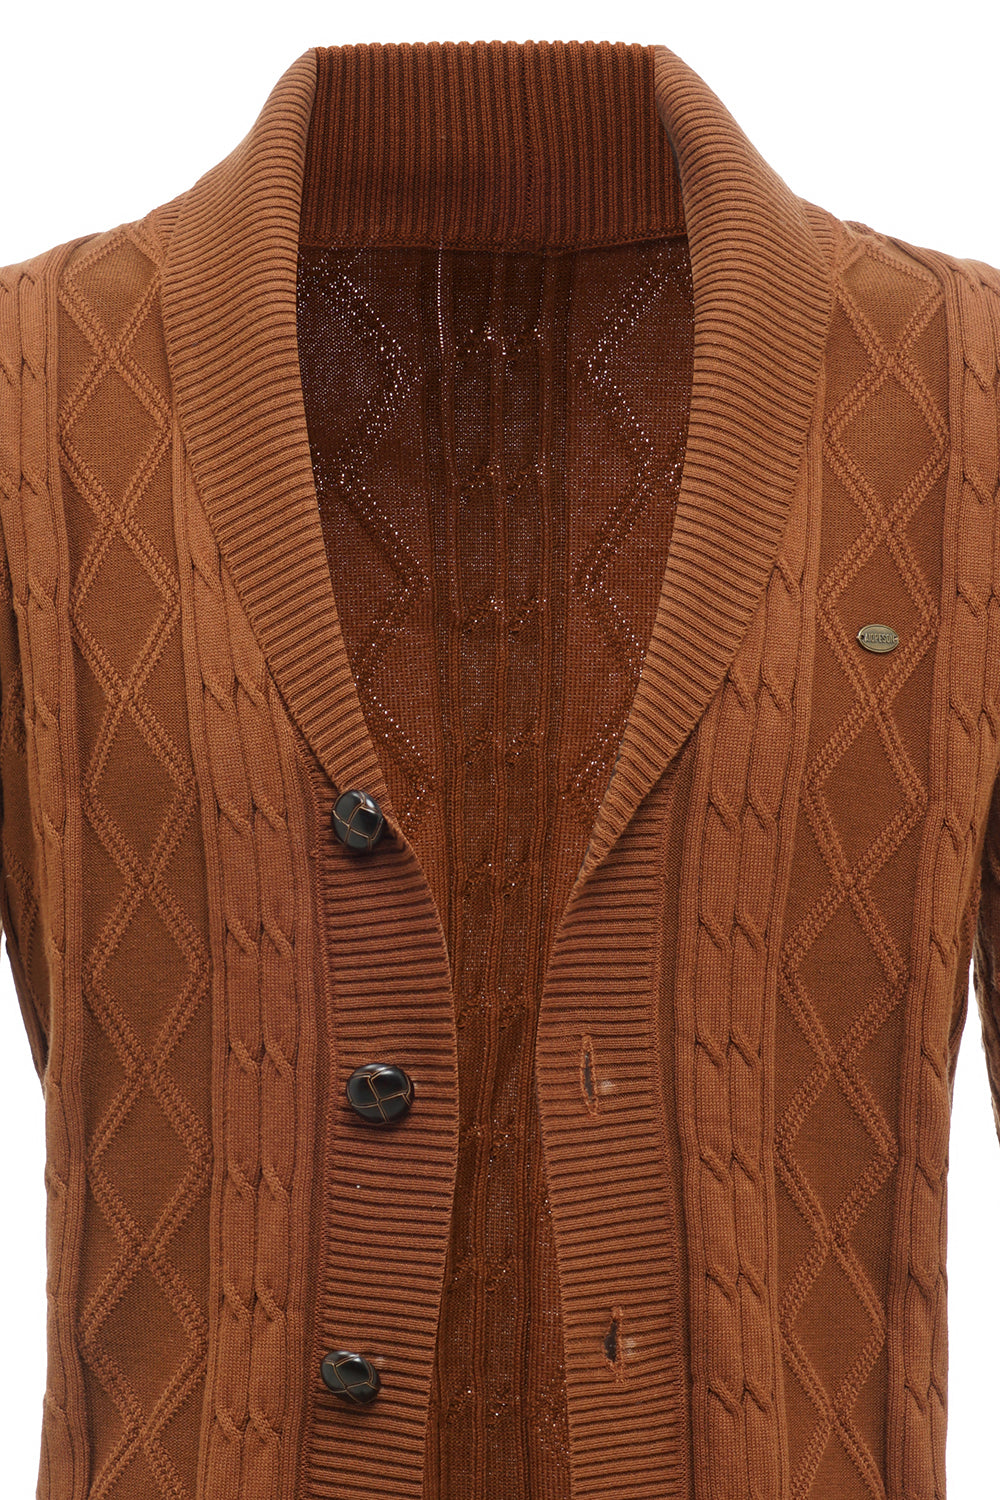 Brown Cable Knitted Long Sleeves Men's Cardigan Sweater